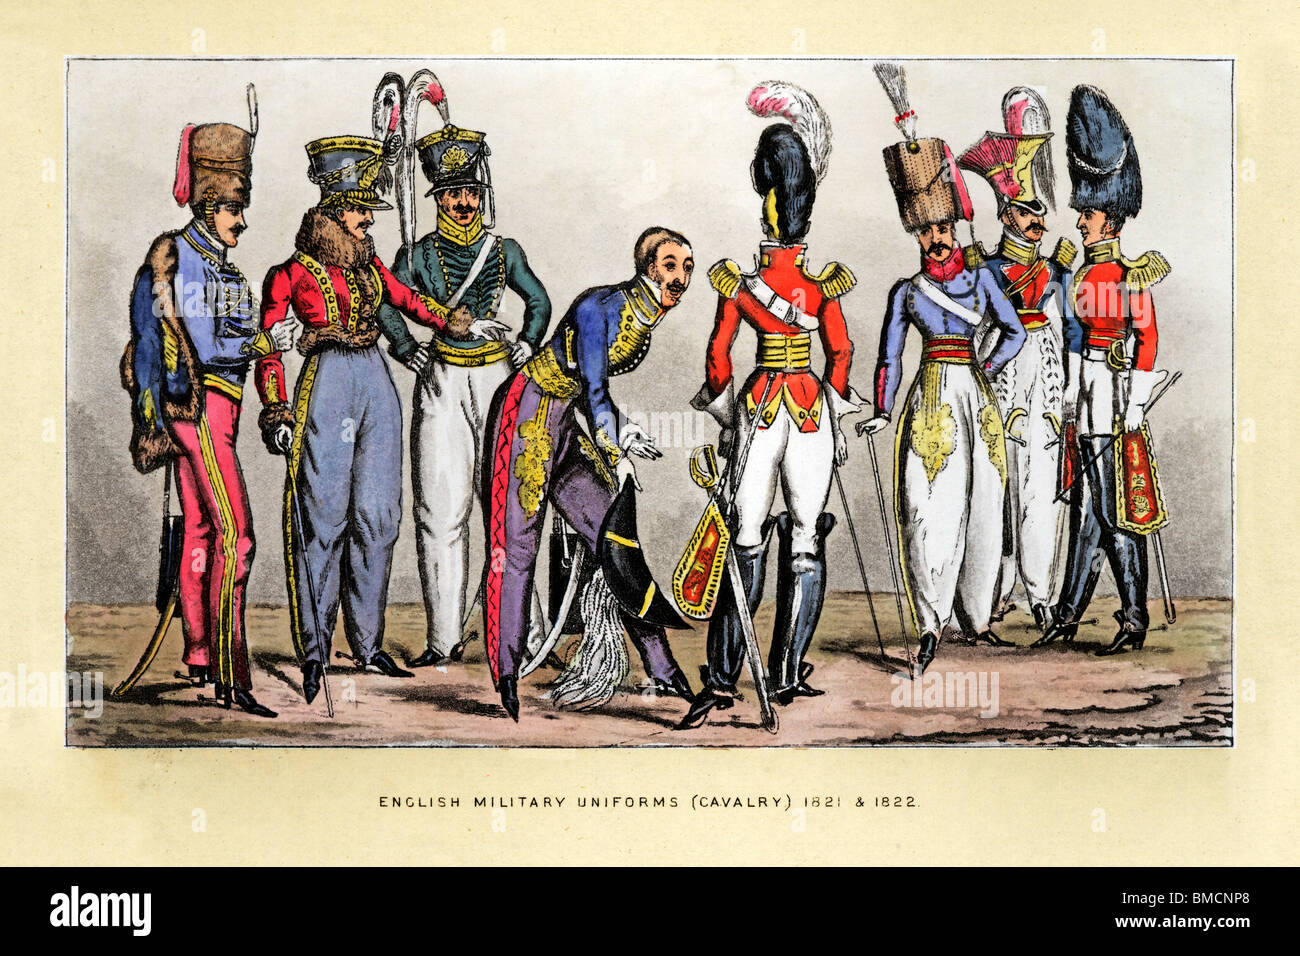 English Cavalry Uniforms, 1822 print of the fancy uniforms of officers parading their finery to each other Stock Photo